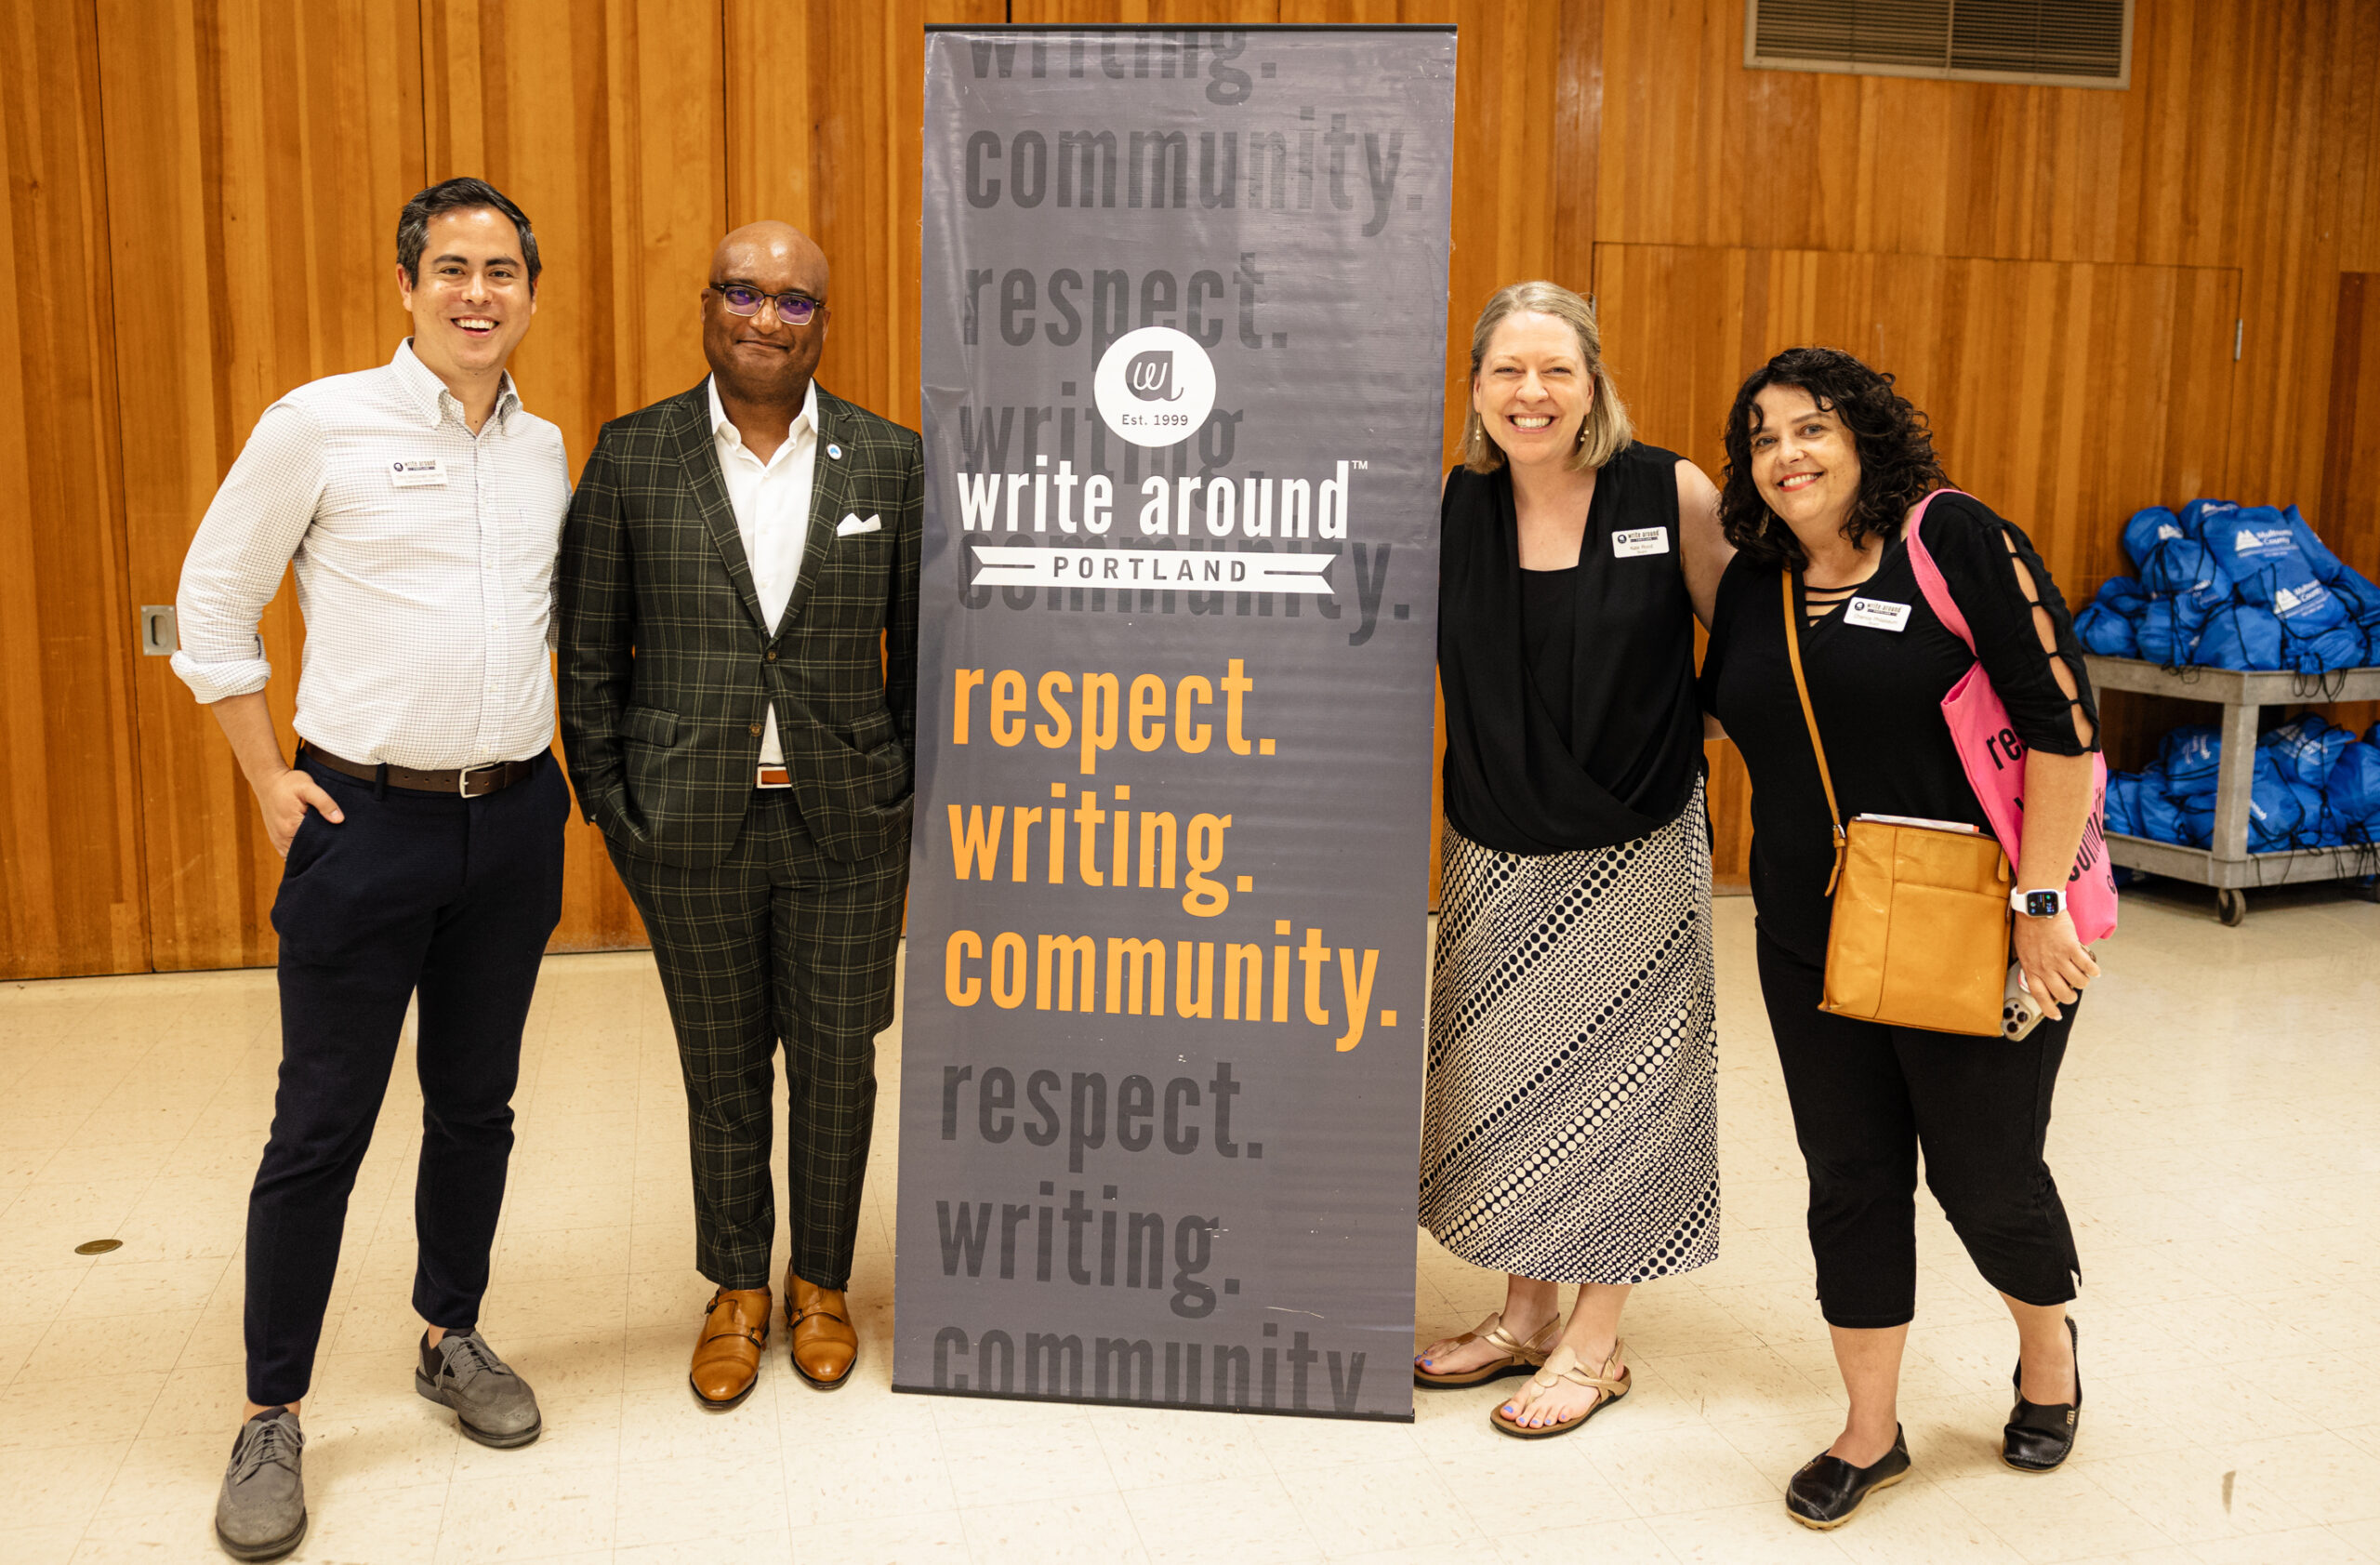 Four people smile and stand around a gray banner that says "respect. writing. community." in orange. 